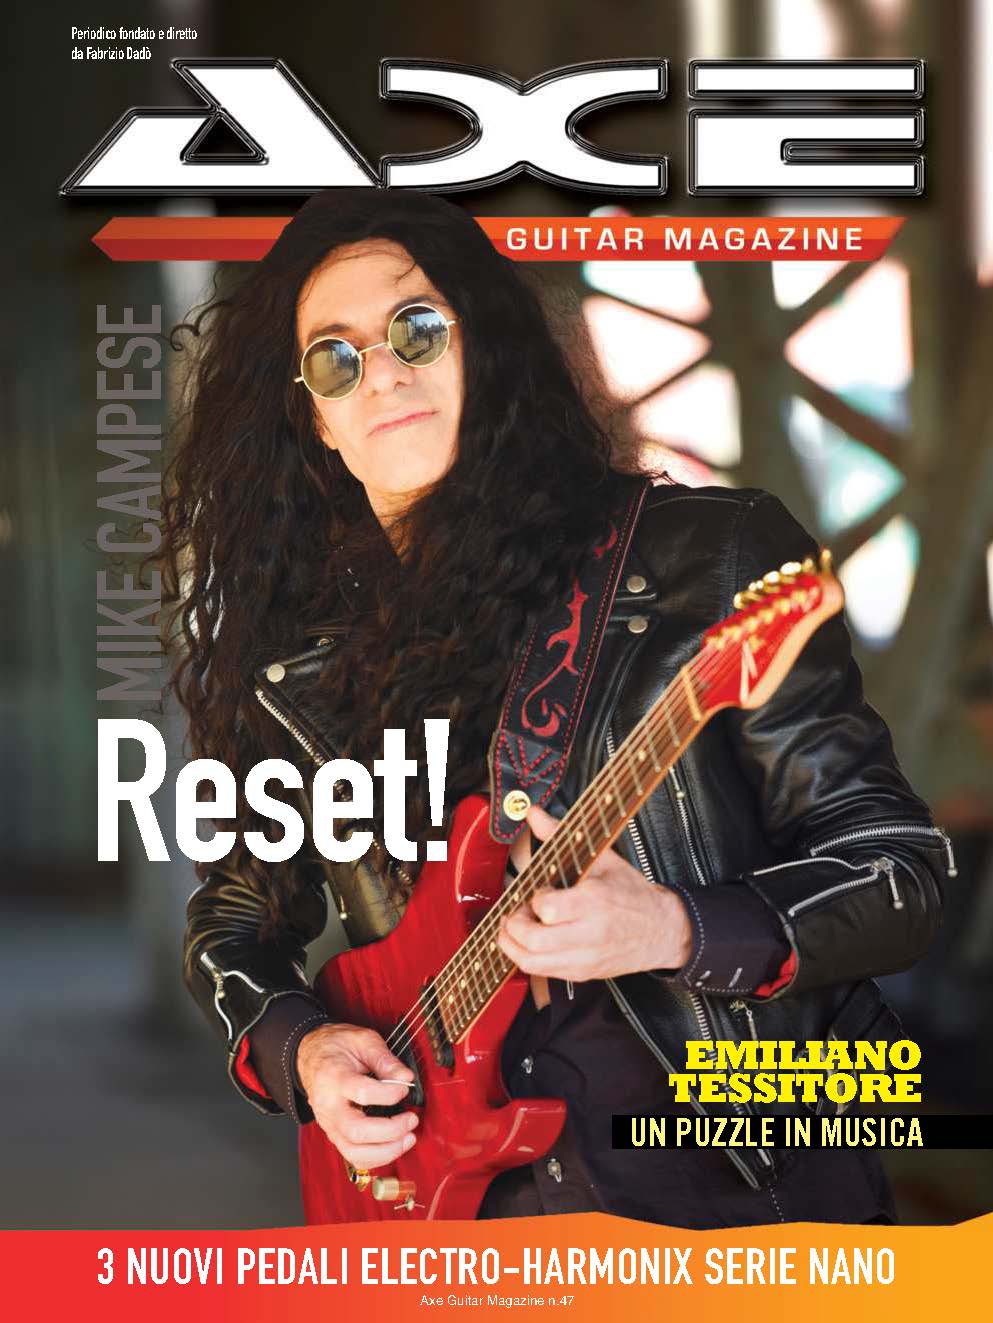 Mike Campese Cover from Axe Guitar Magazine, Italy 47.